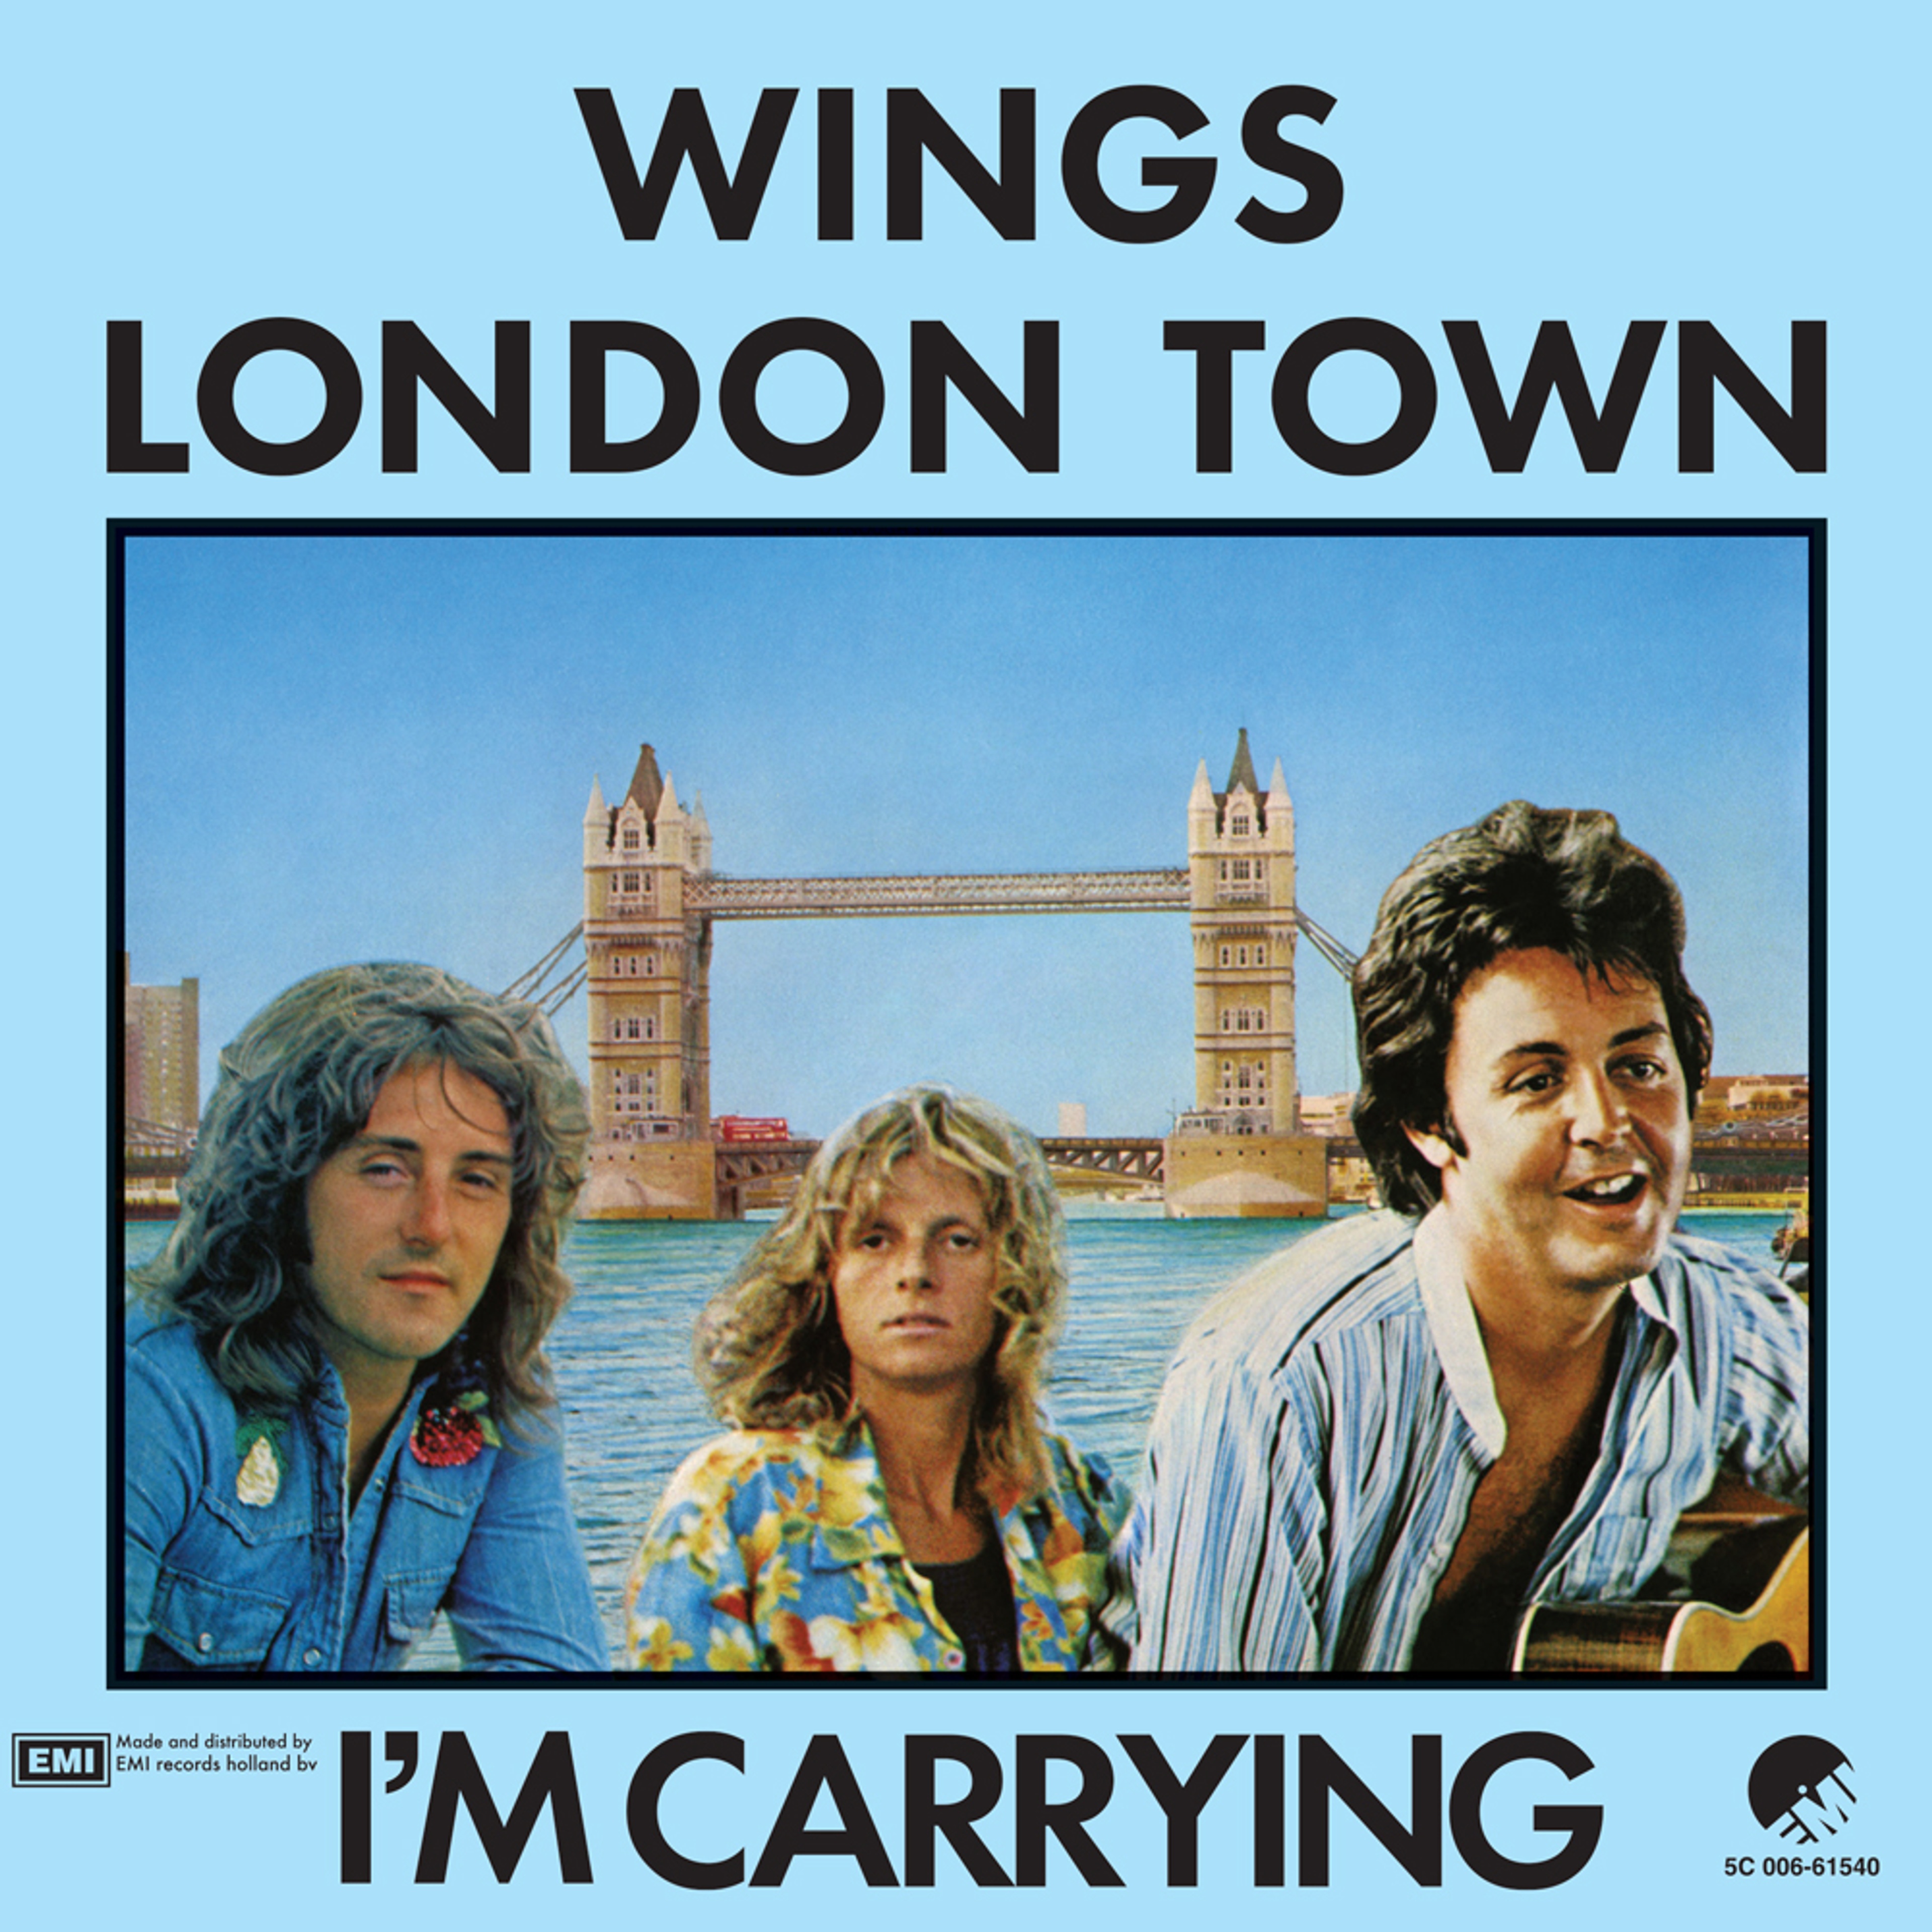 “London Town” Single artwork as featured in 'The 7" Singles Box'